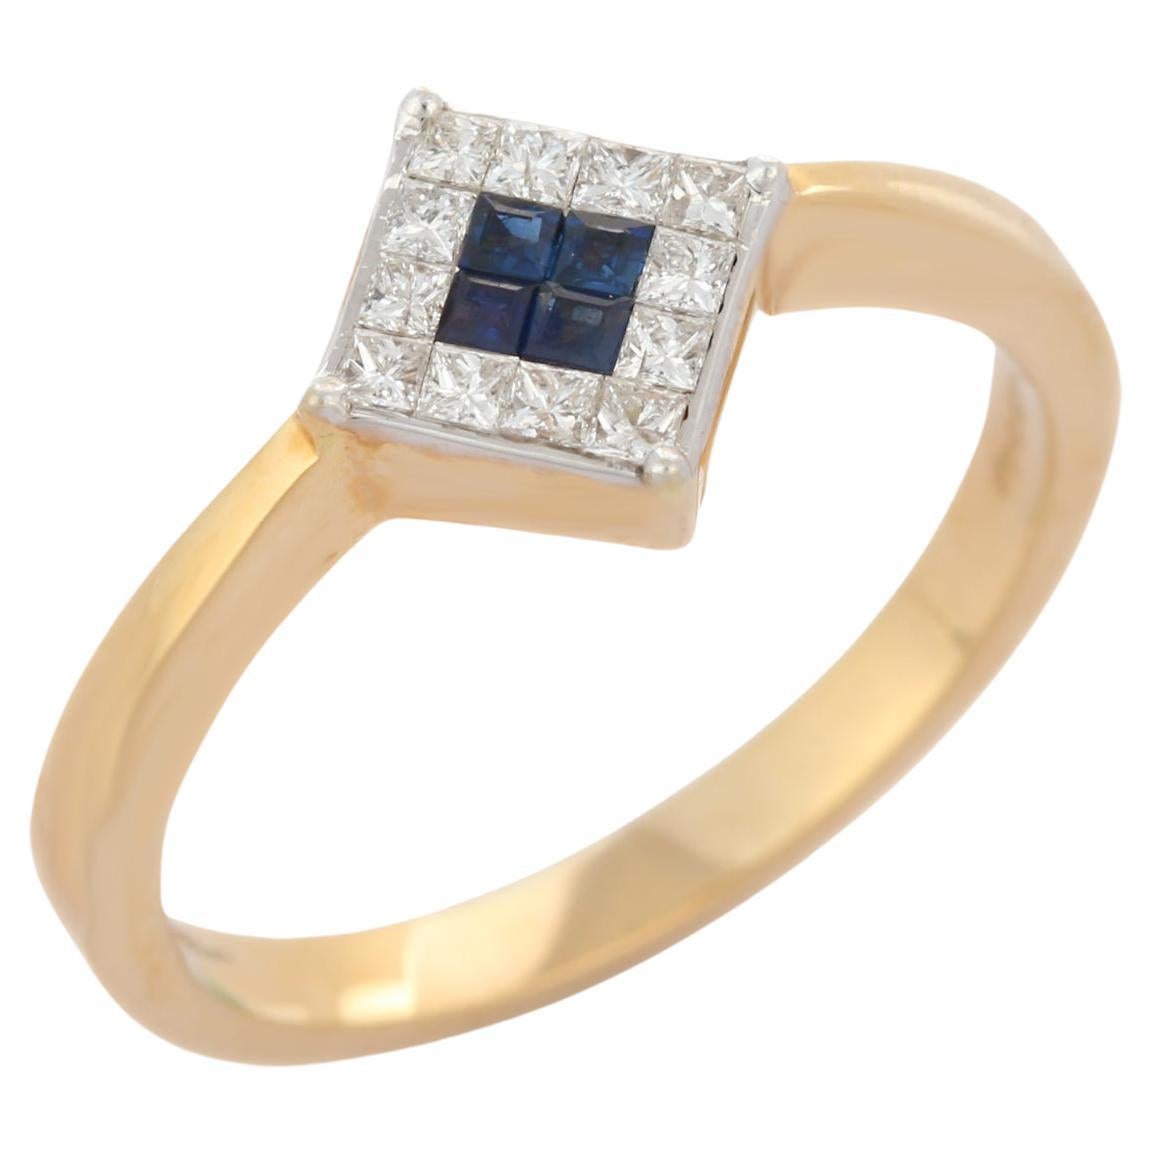 For Sale:  Natural Blue Sapphire Diamond Dainty Square Ring Set in 18k Solid Yellow Gold